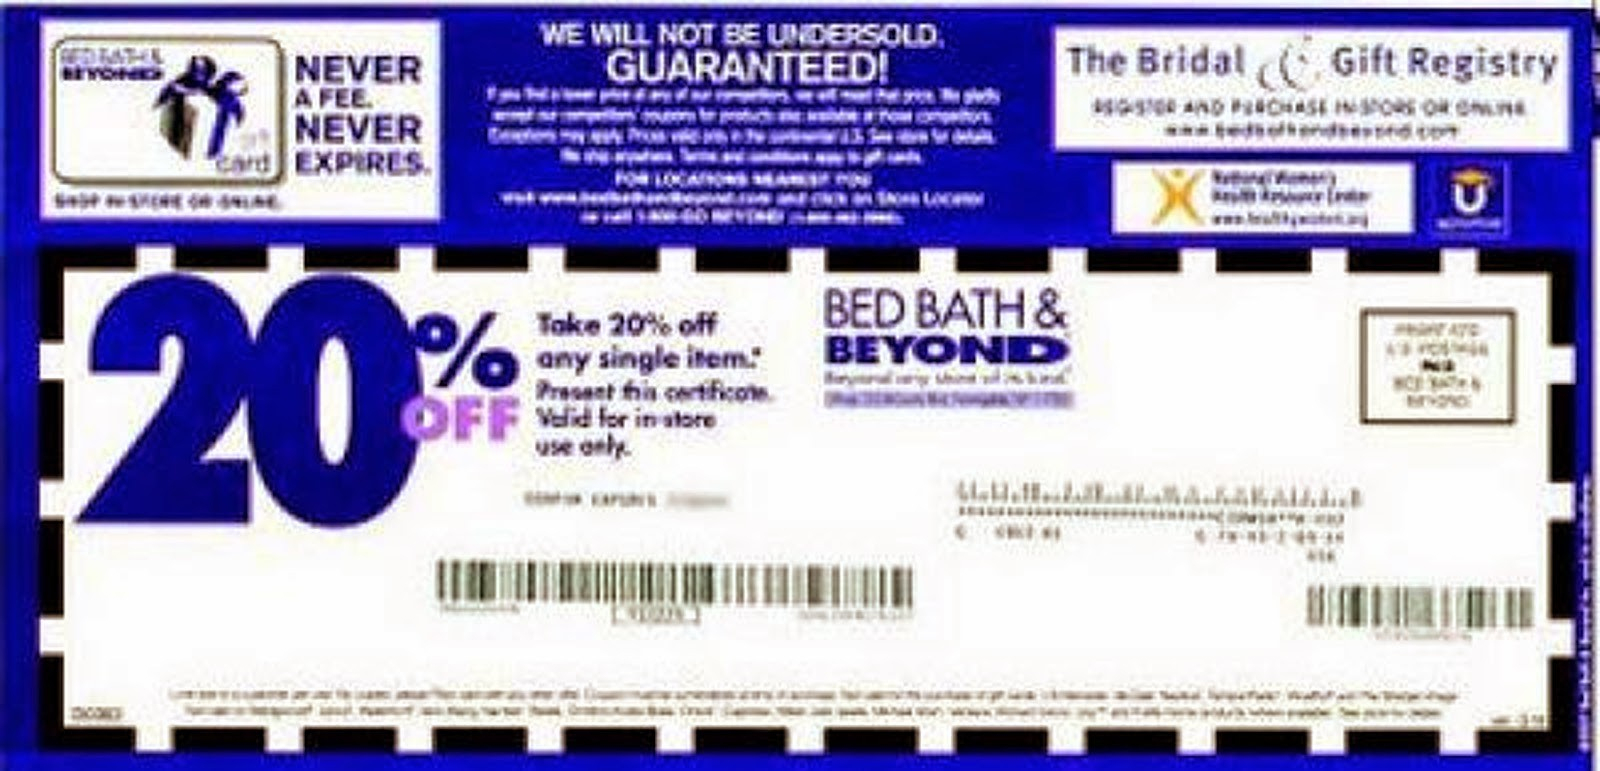 Bed Bath And Beyond Coupons 20 Off Printable Coupon - Mysembalun - Free Printable Bed Bath And Beyond Coupon 2019